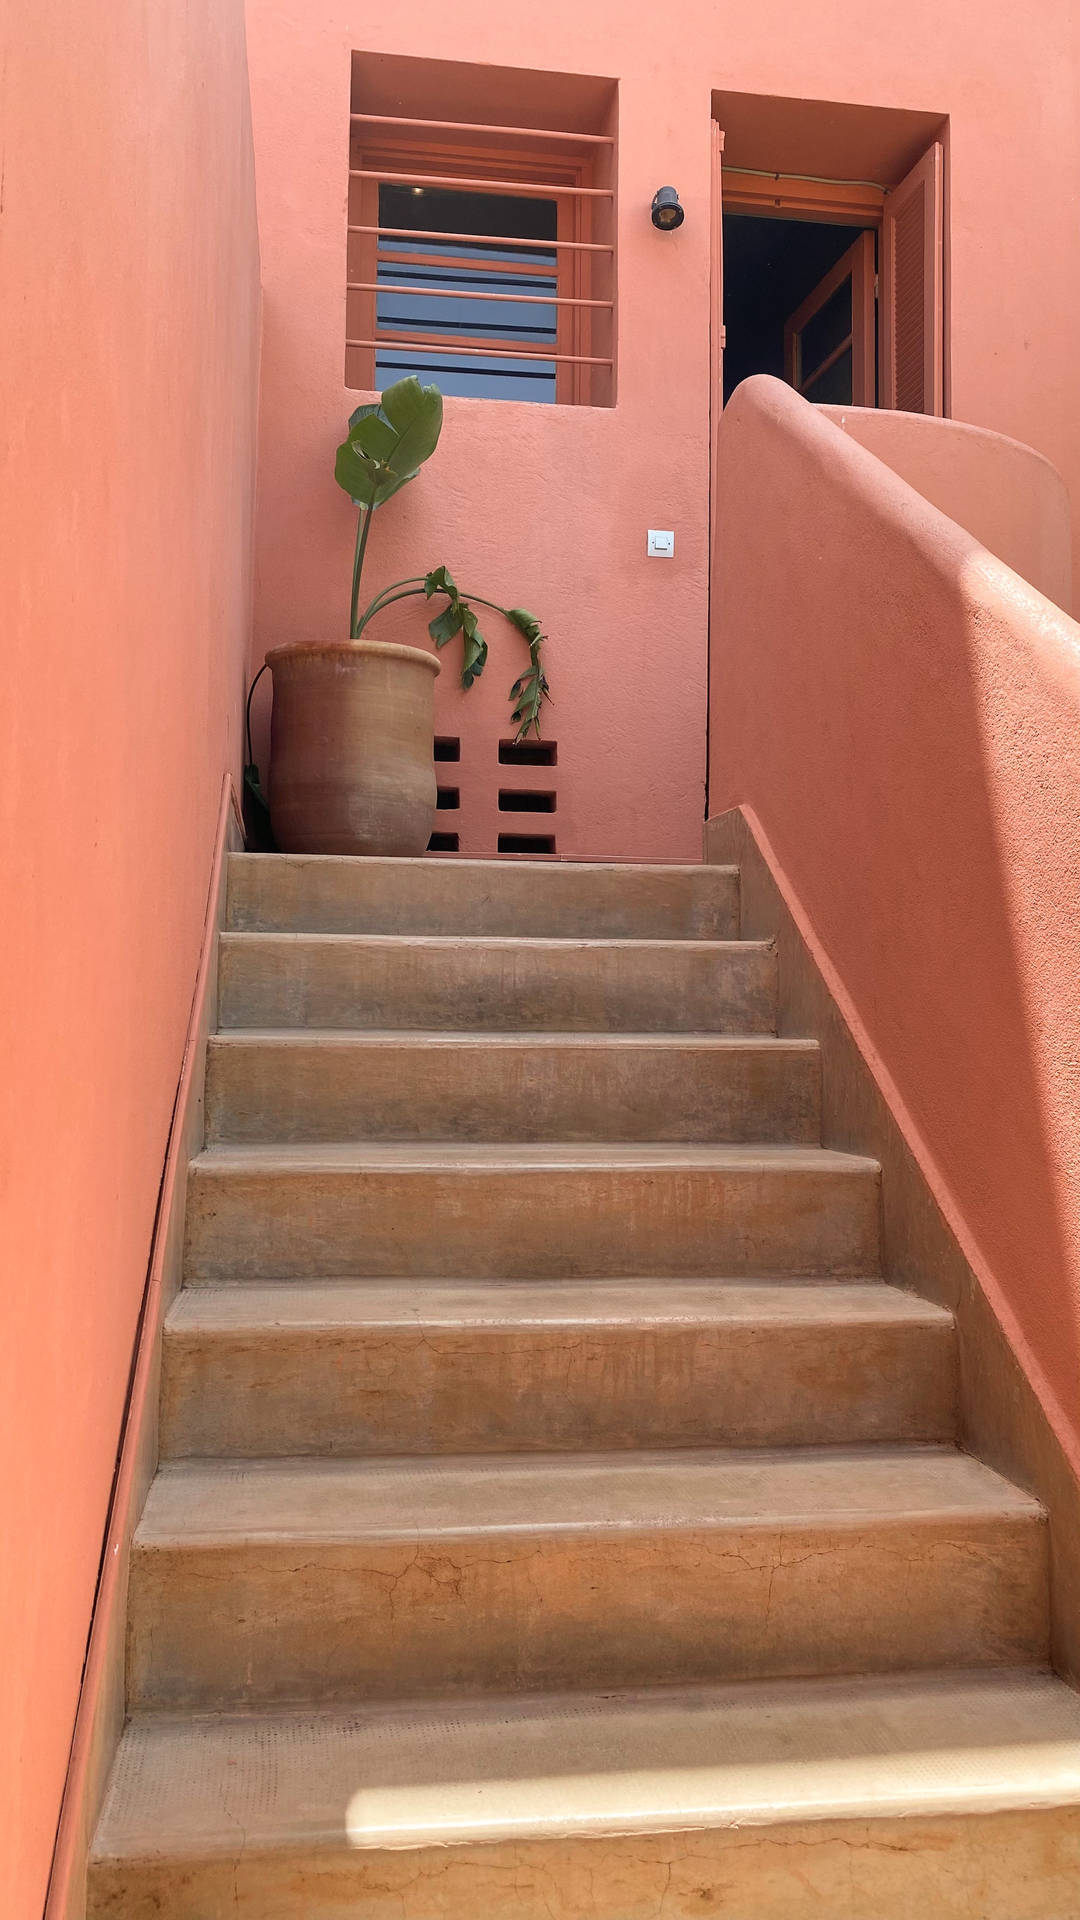 Download Stairway Potted Plant Aesthetic Wallpaper